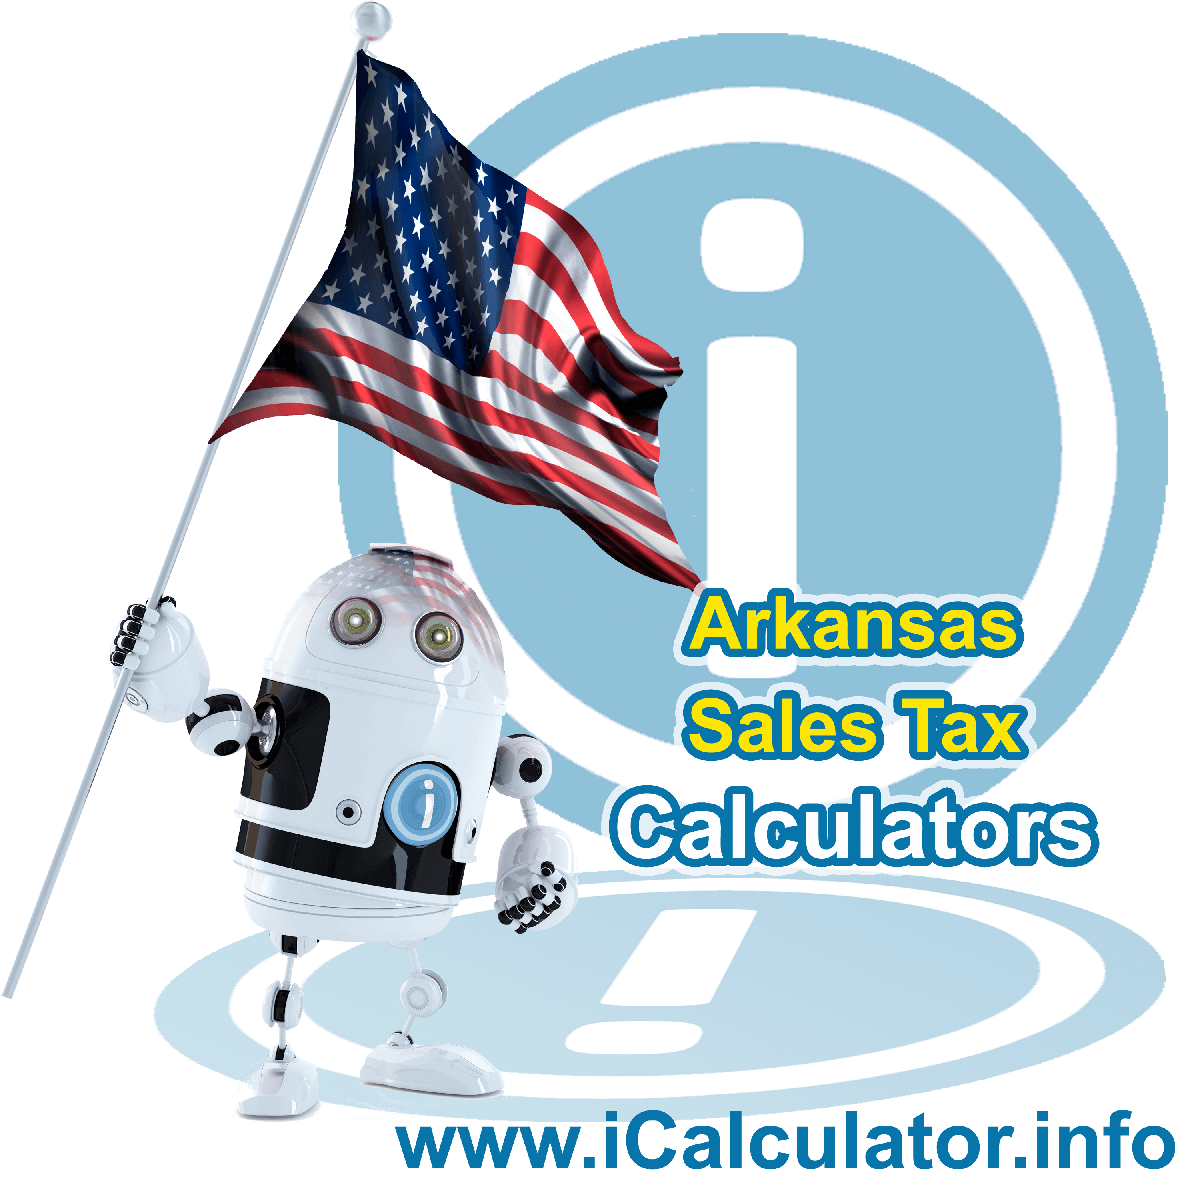 Paron Sales Rates: This image illustrates a calculator robot calculating Paron sales tax manually using the Paron Sales Tax Formula. You can use this information to calculate Paron Sales Tax manually or use the Paron Sales Tax Calculator to calculate sales tax online.